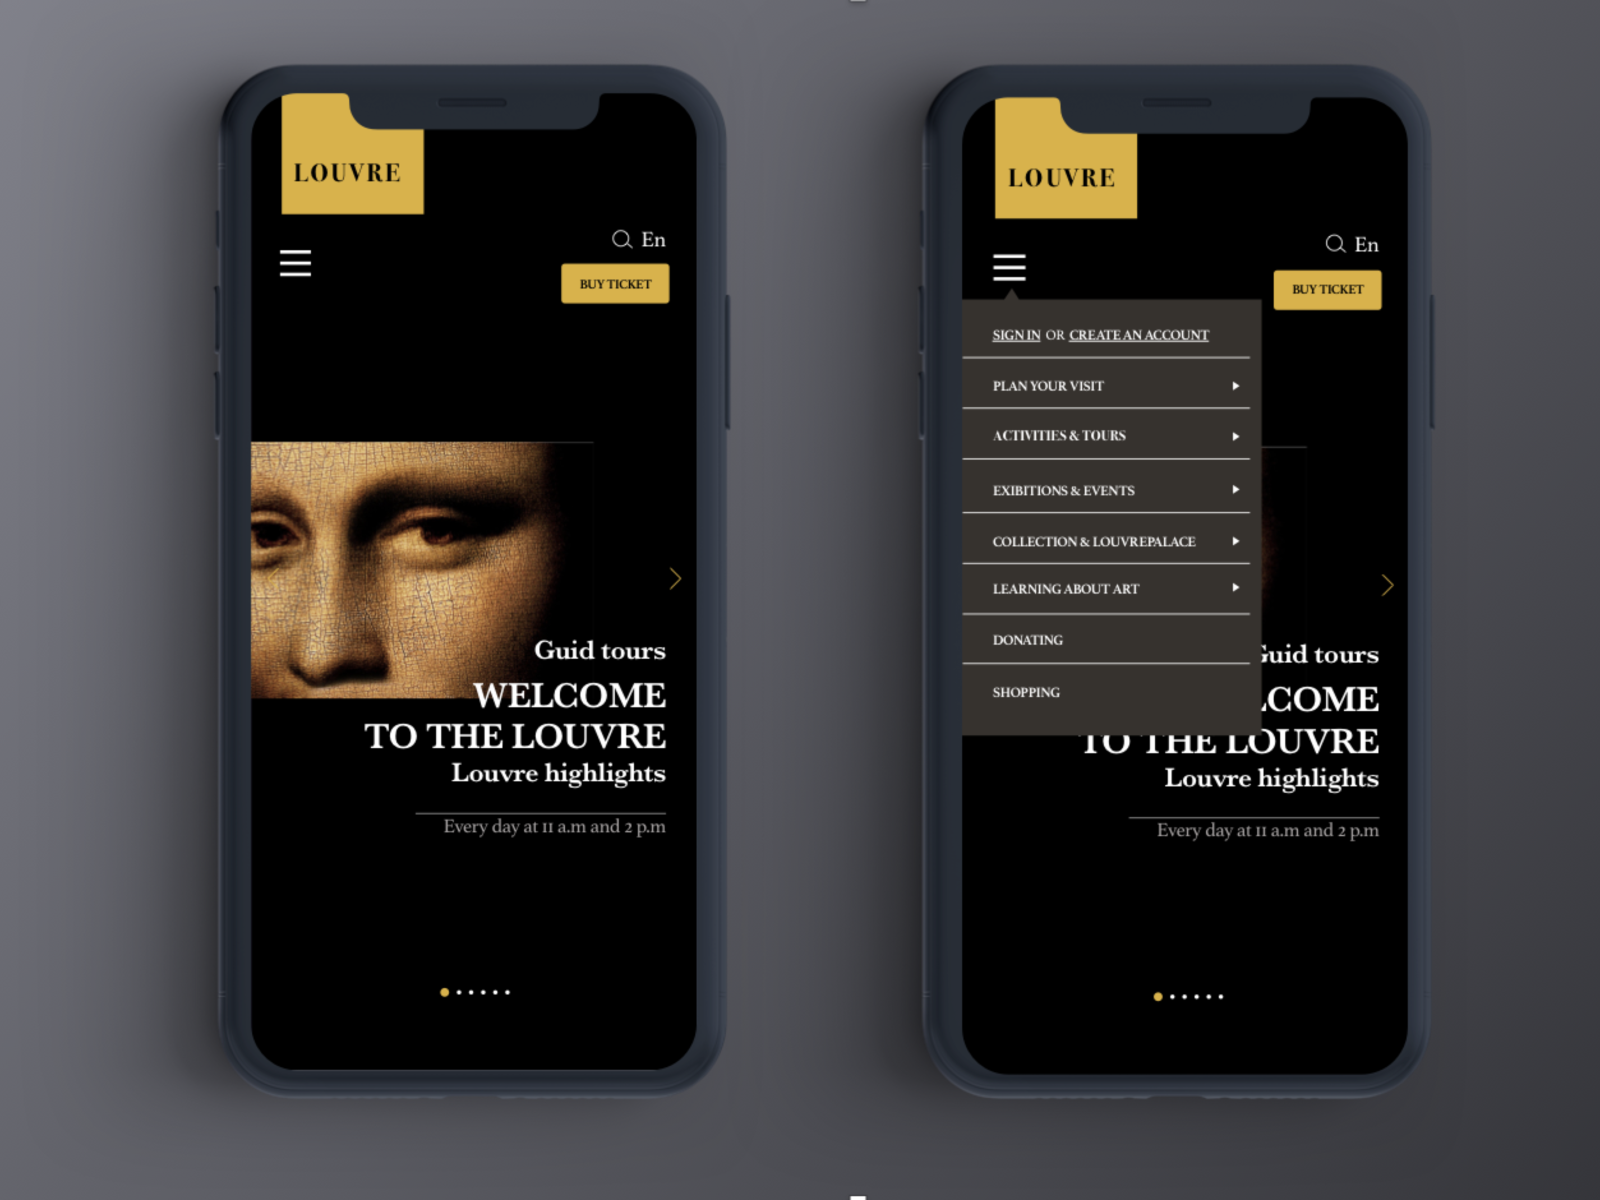 Louvre Museum Mobile app Concept by Weiran Huang on Dribbble